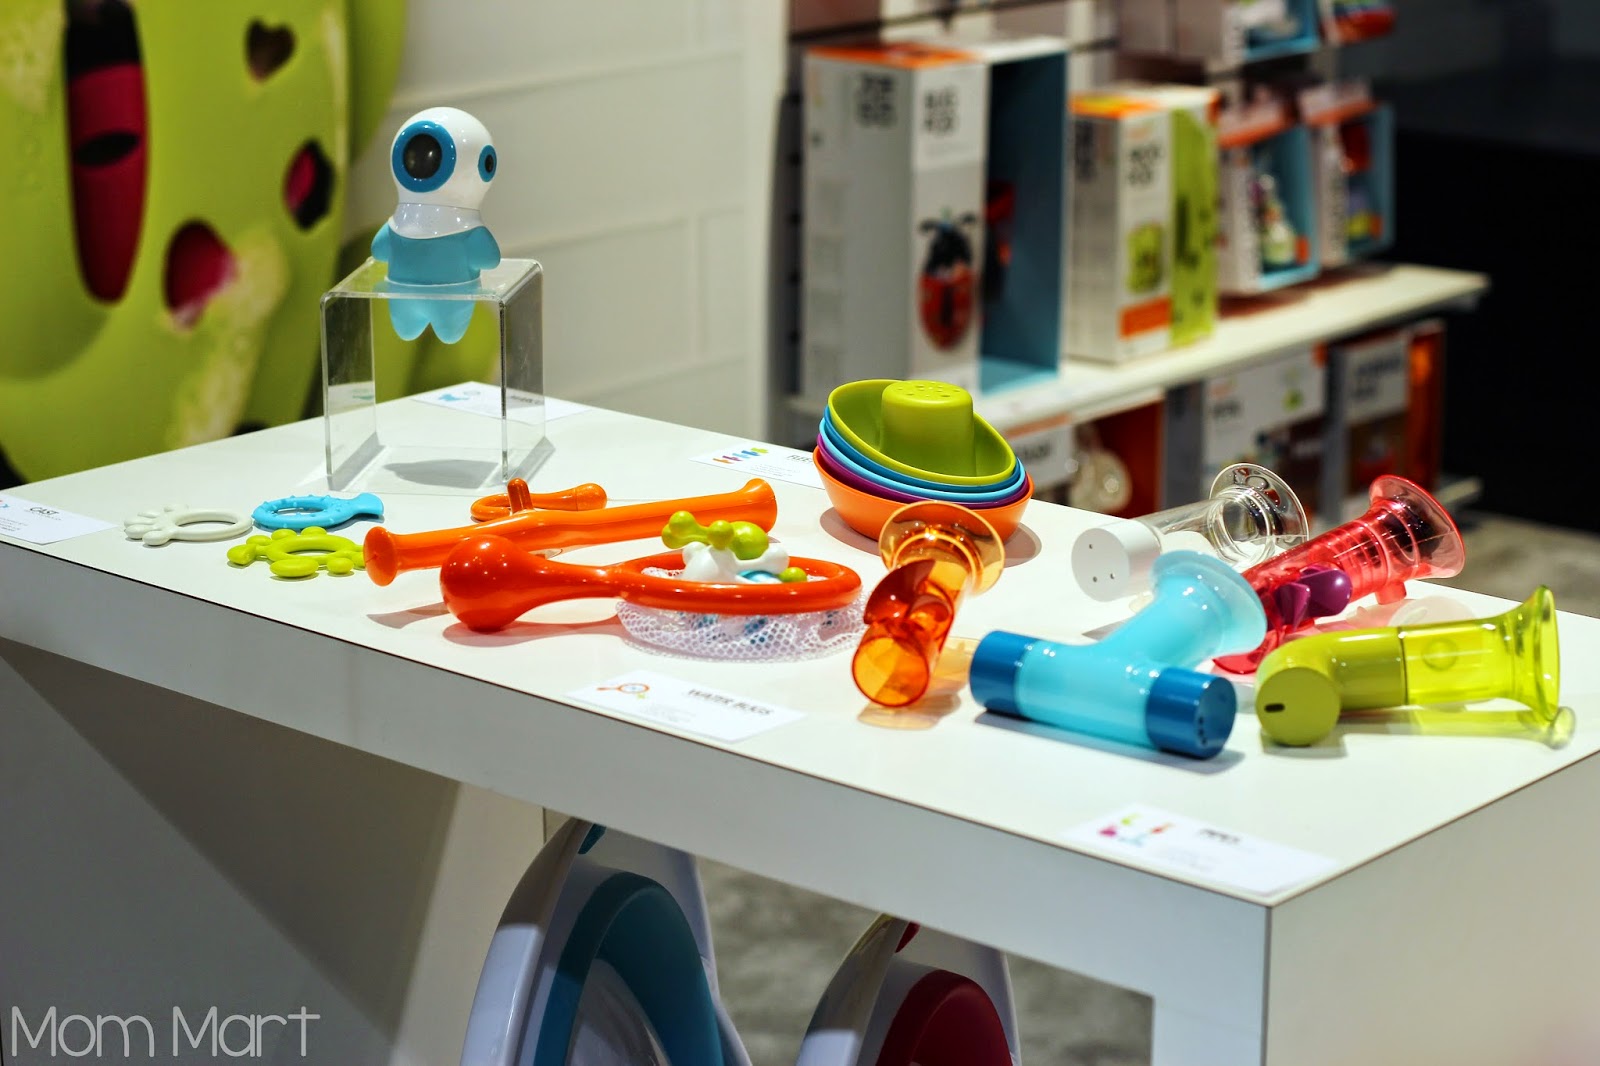 ABC Kids Expo 2014 The Toys of #ABCKids14 Boon PIPES, MARCO, CAST, FLEET, and WATER BUGS